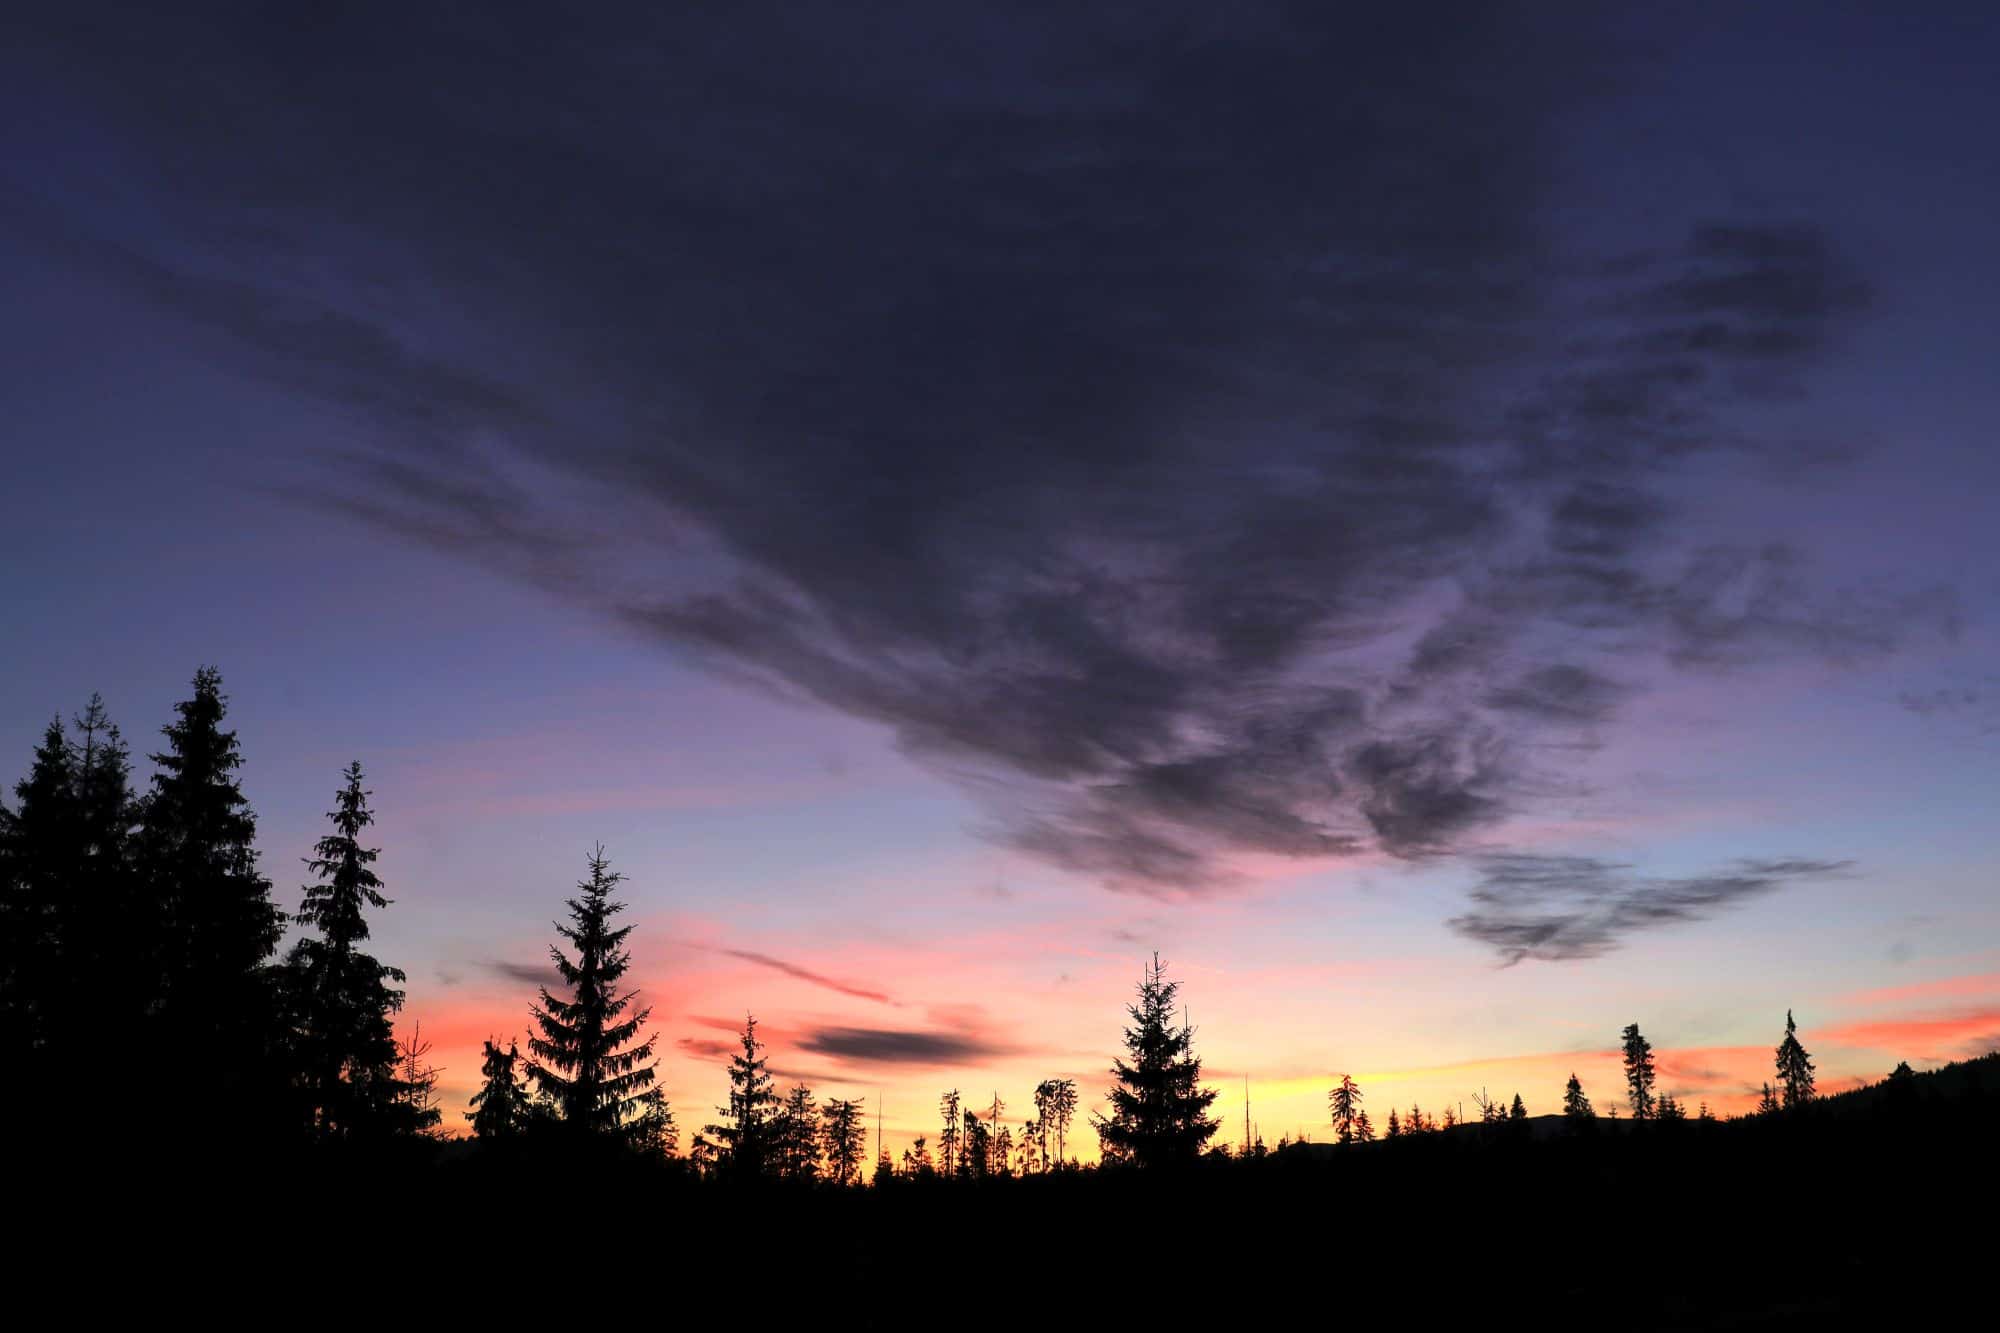 Silhouettes of conifer trees against a twilight sky with pink and blue hues.